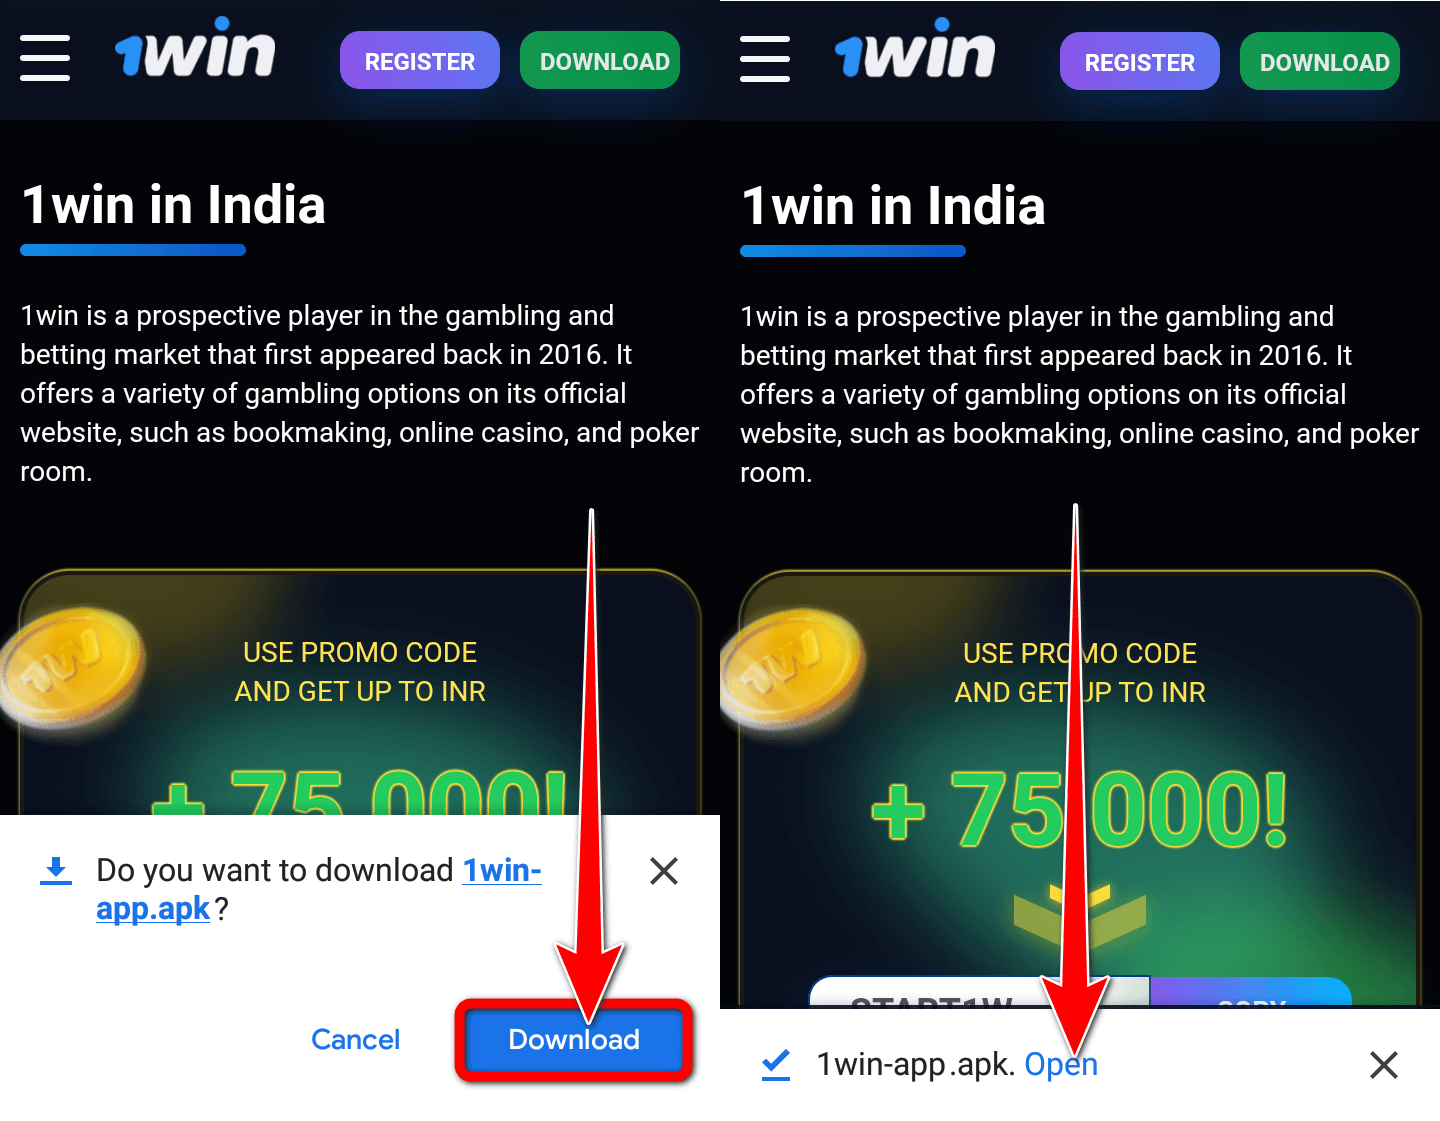 Download and install the 1win app